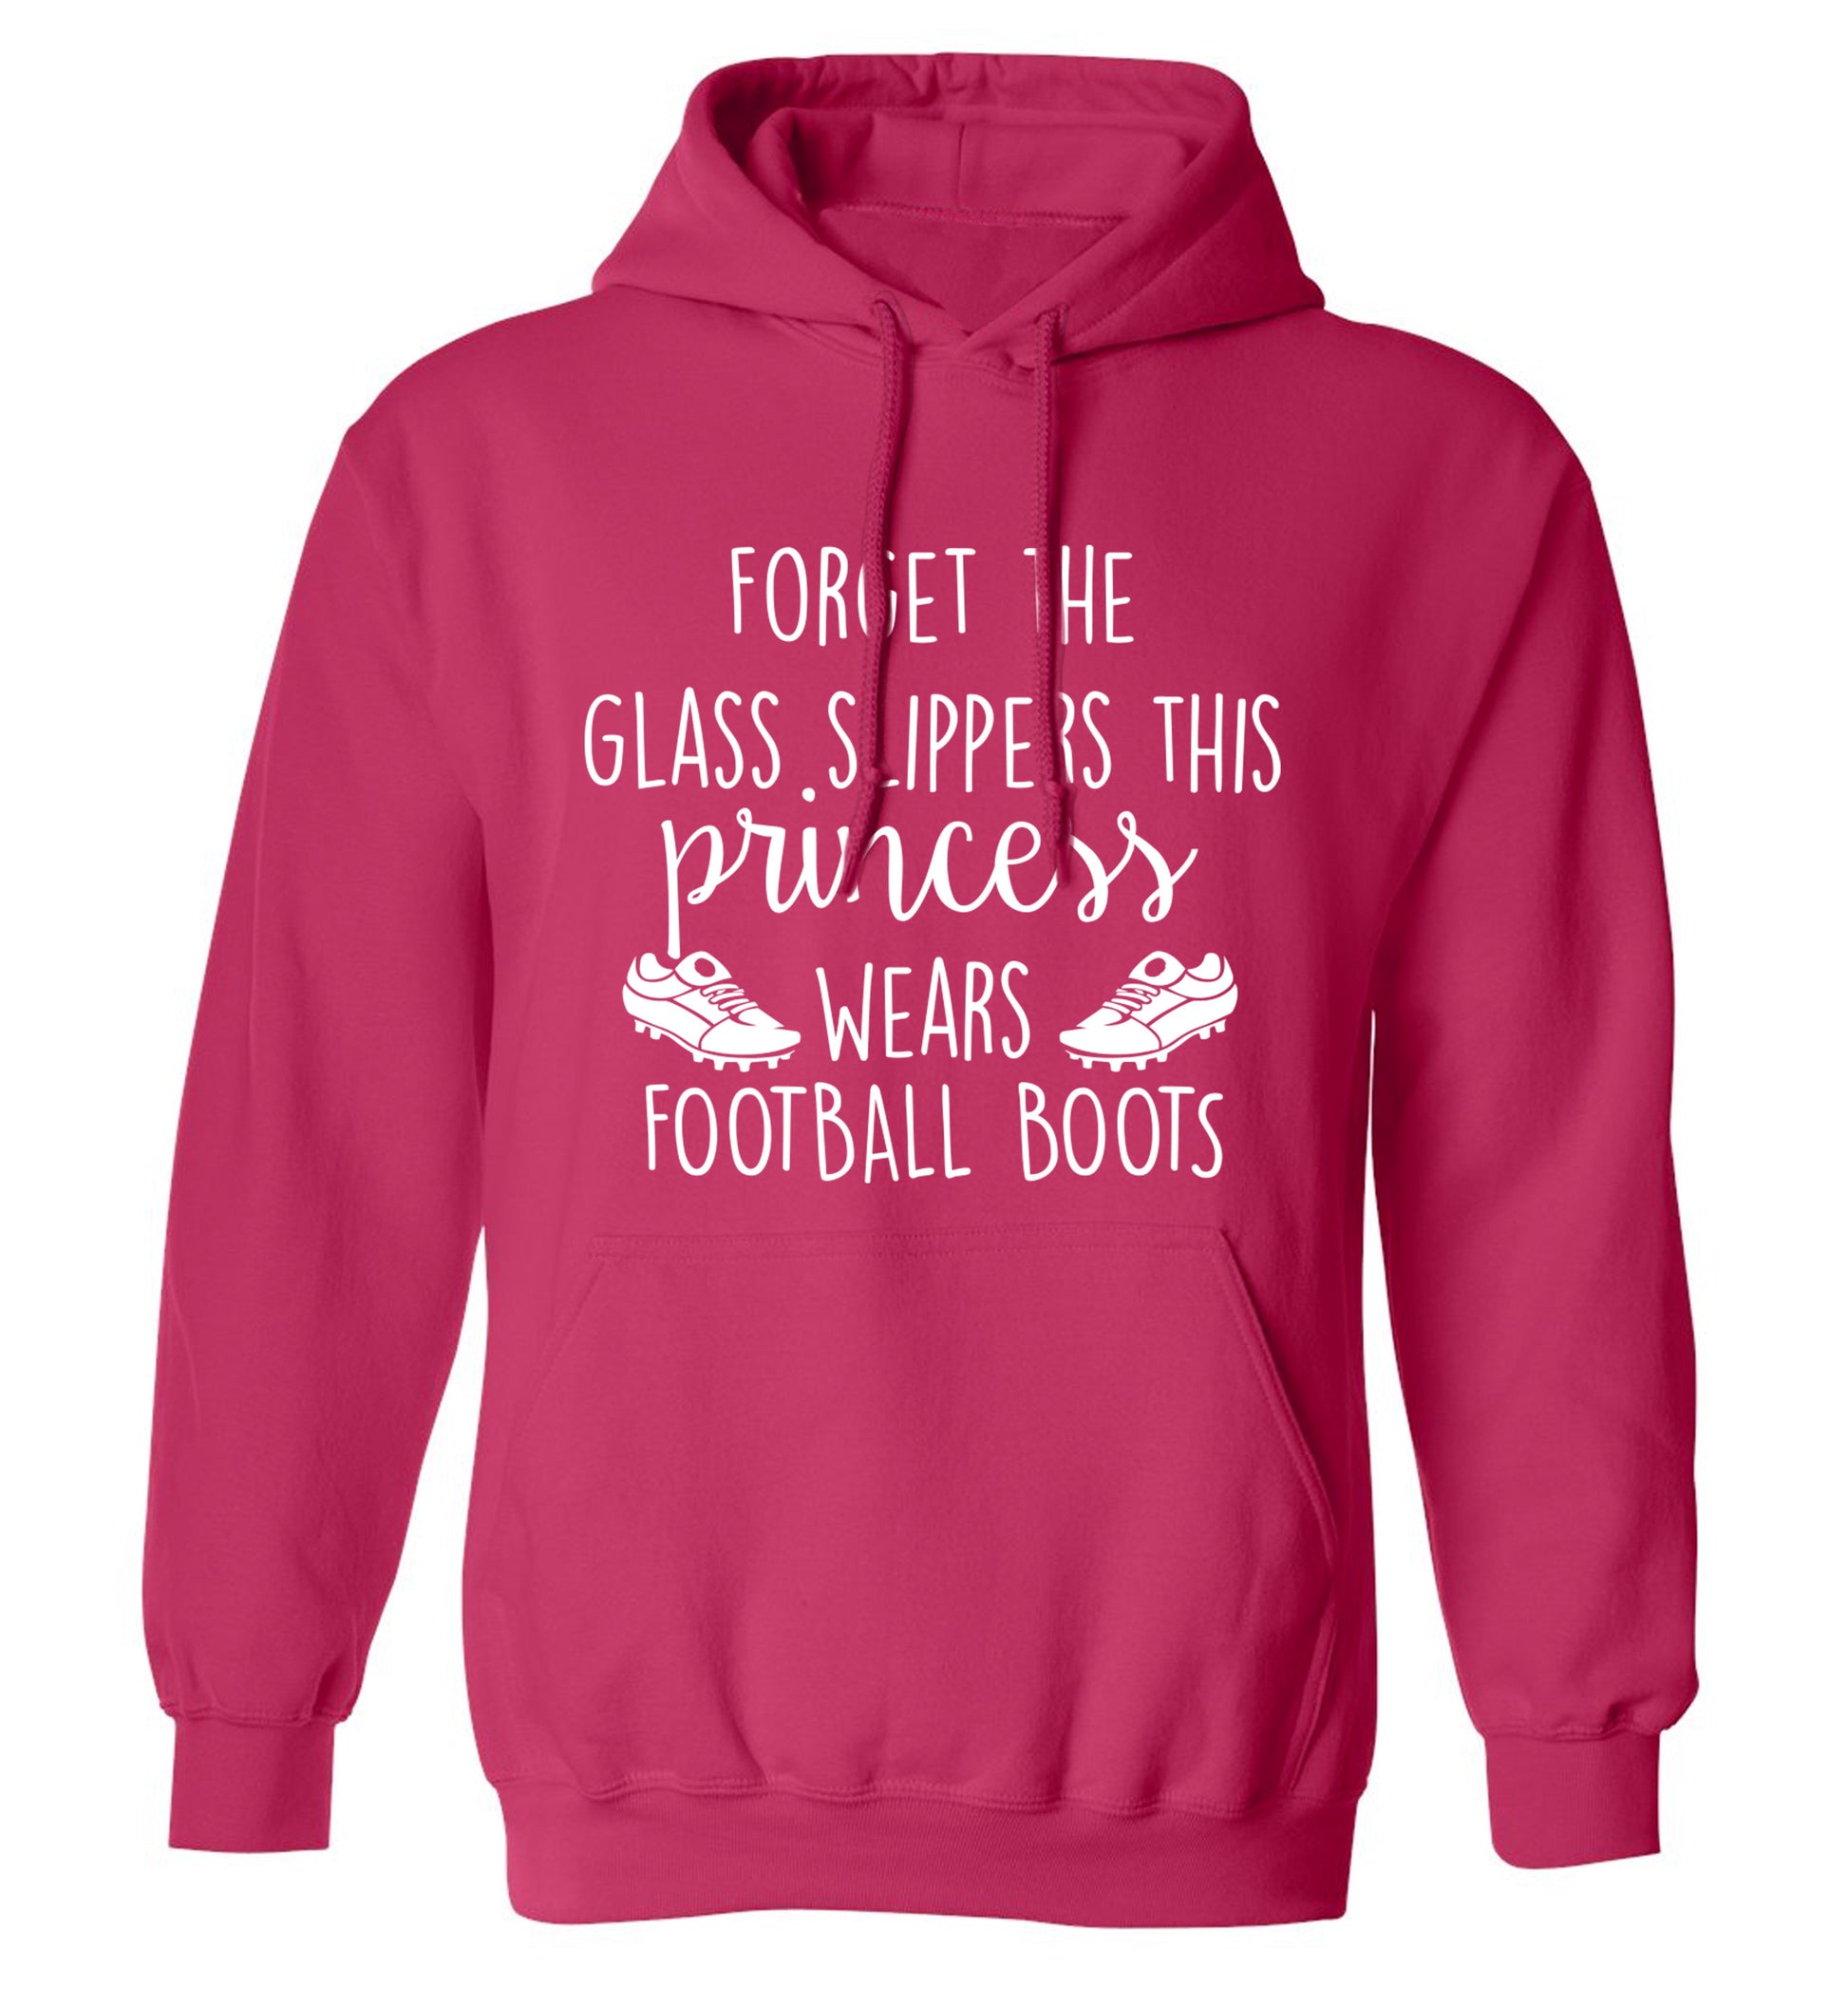 Forget the glass slippers this princess wears football boots adults unisex pink hoodie 2XL